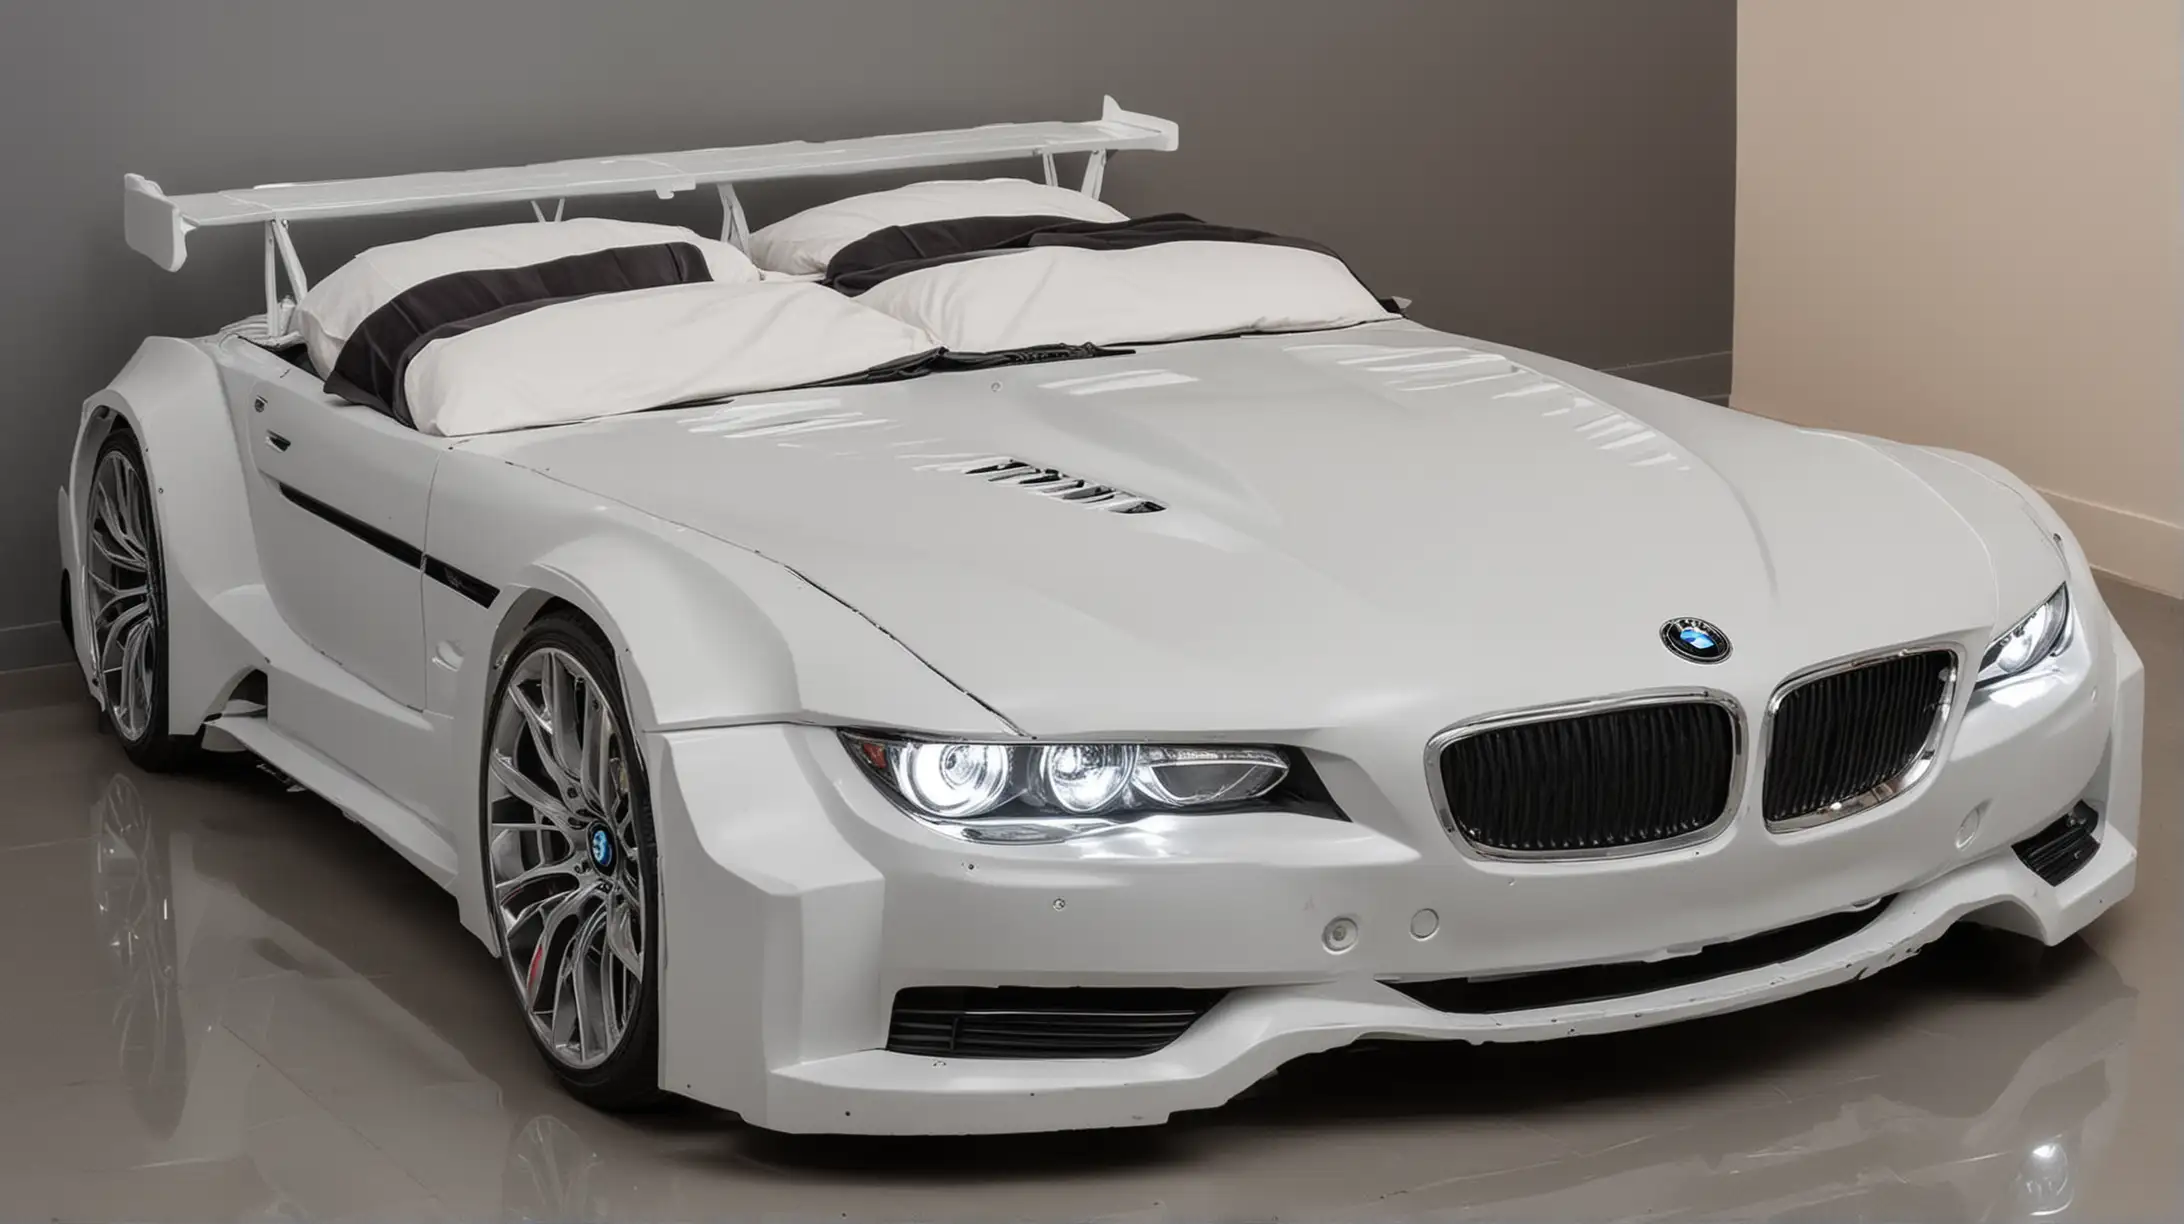 Luxurious Double Bed Shaped Like BMW Car with Illuminated Headlights